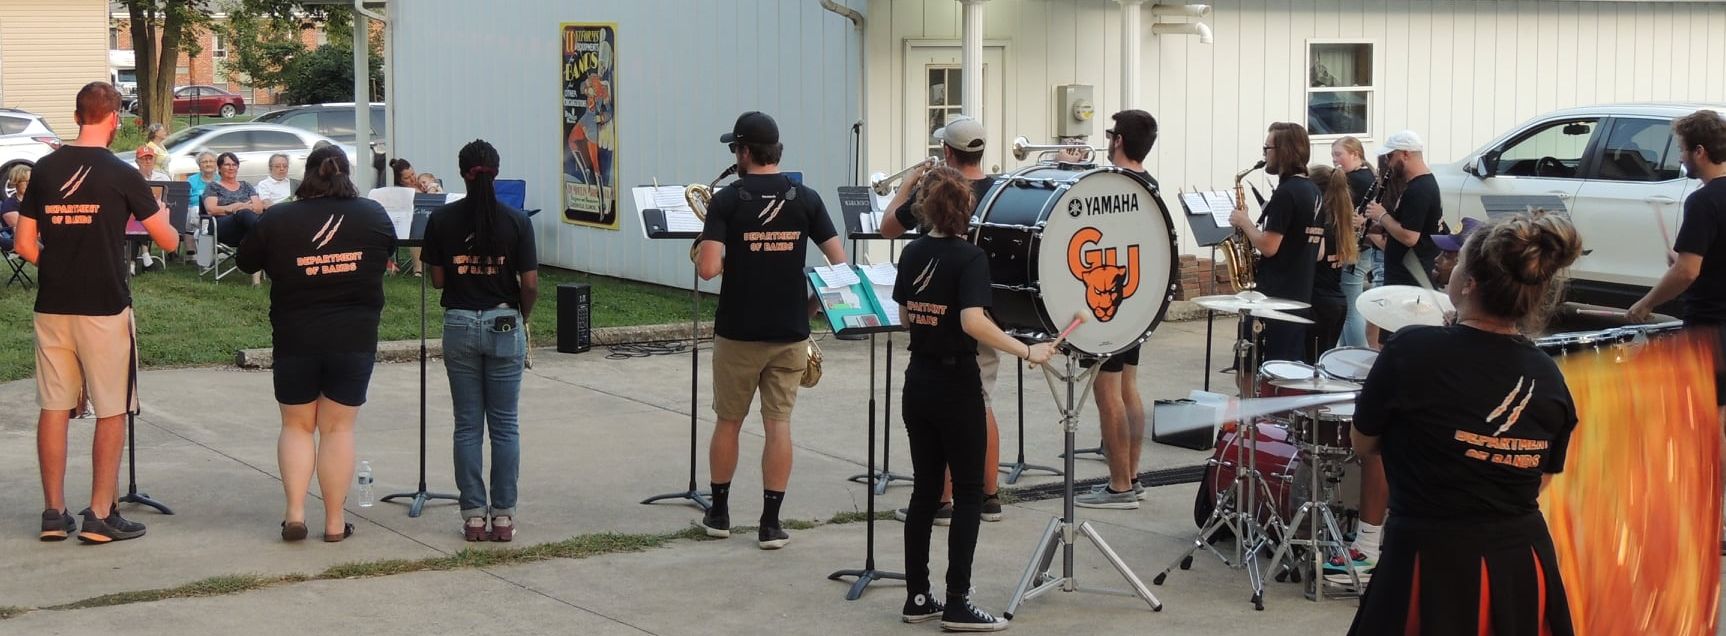 young men and women stand outside on concrete slab with musical instruments while older people listen to concert from lawn chairs.